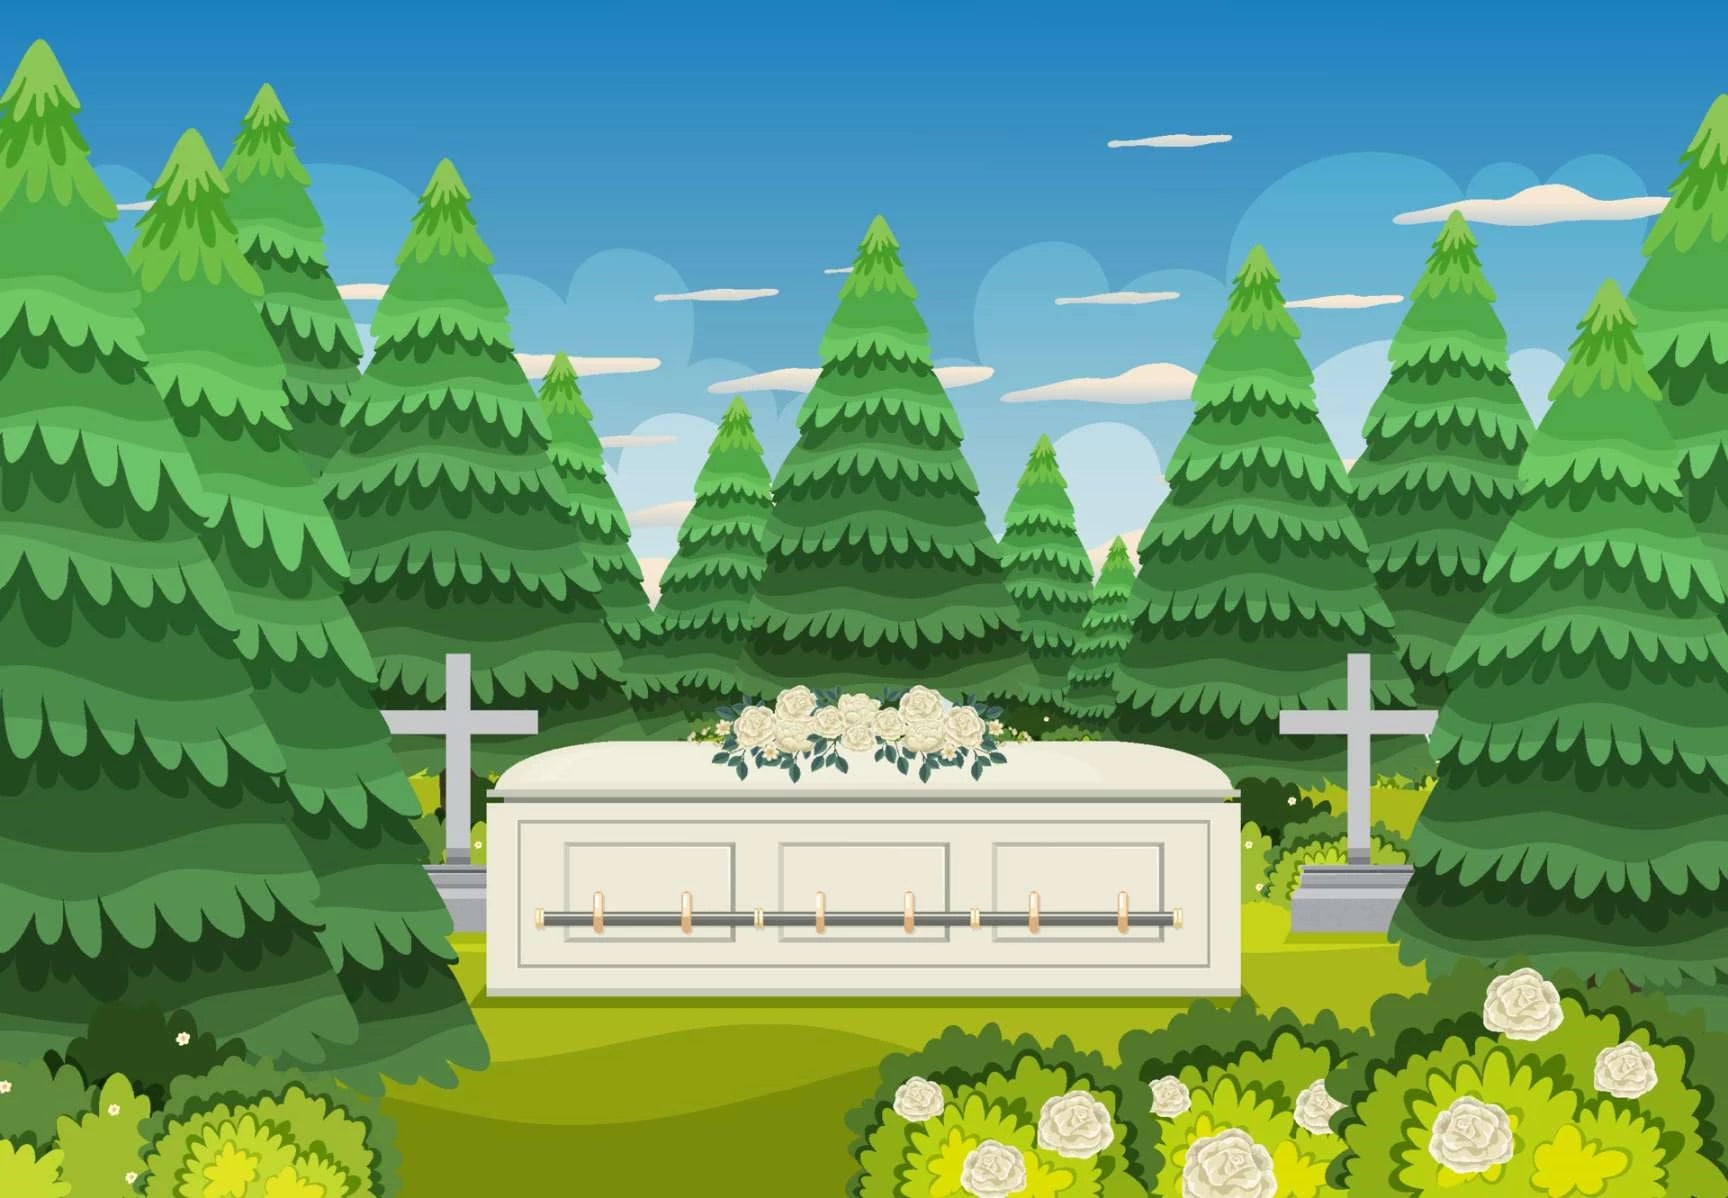 Steer Clear Of Expensive Funeral Costs With Funeral Pre-Planning